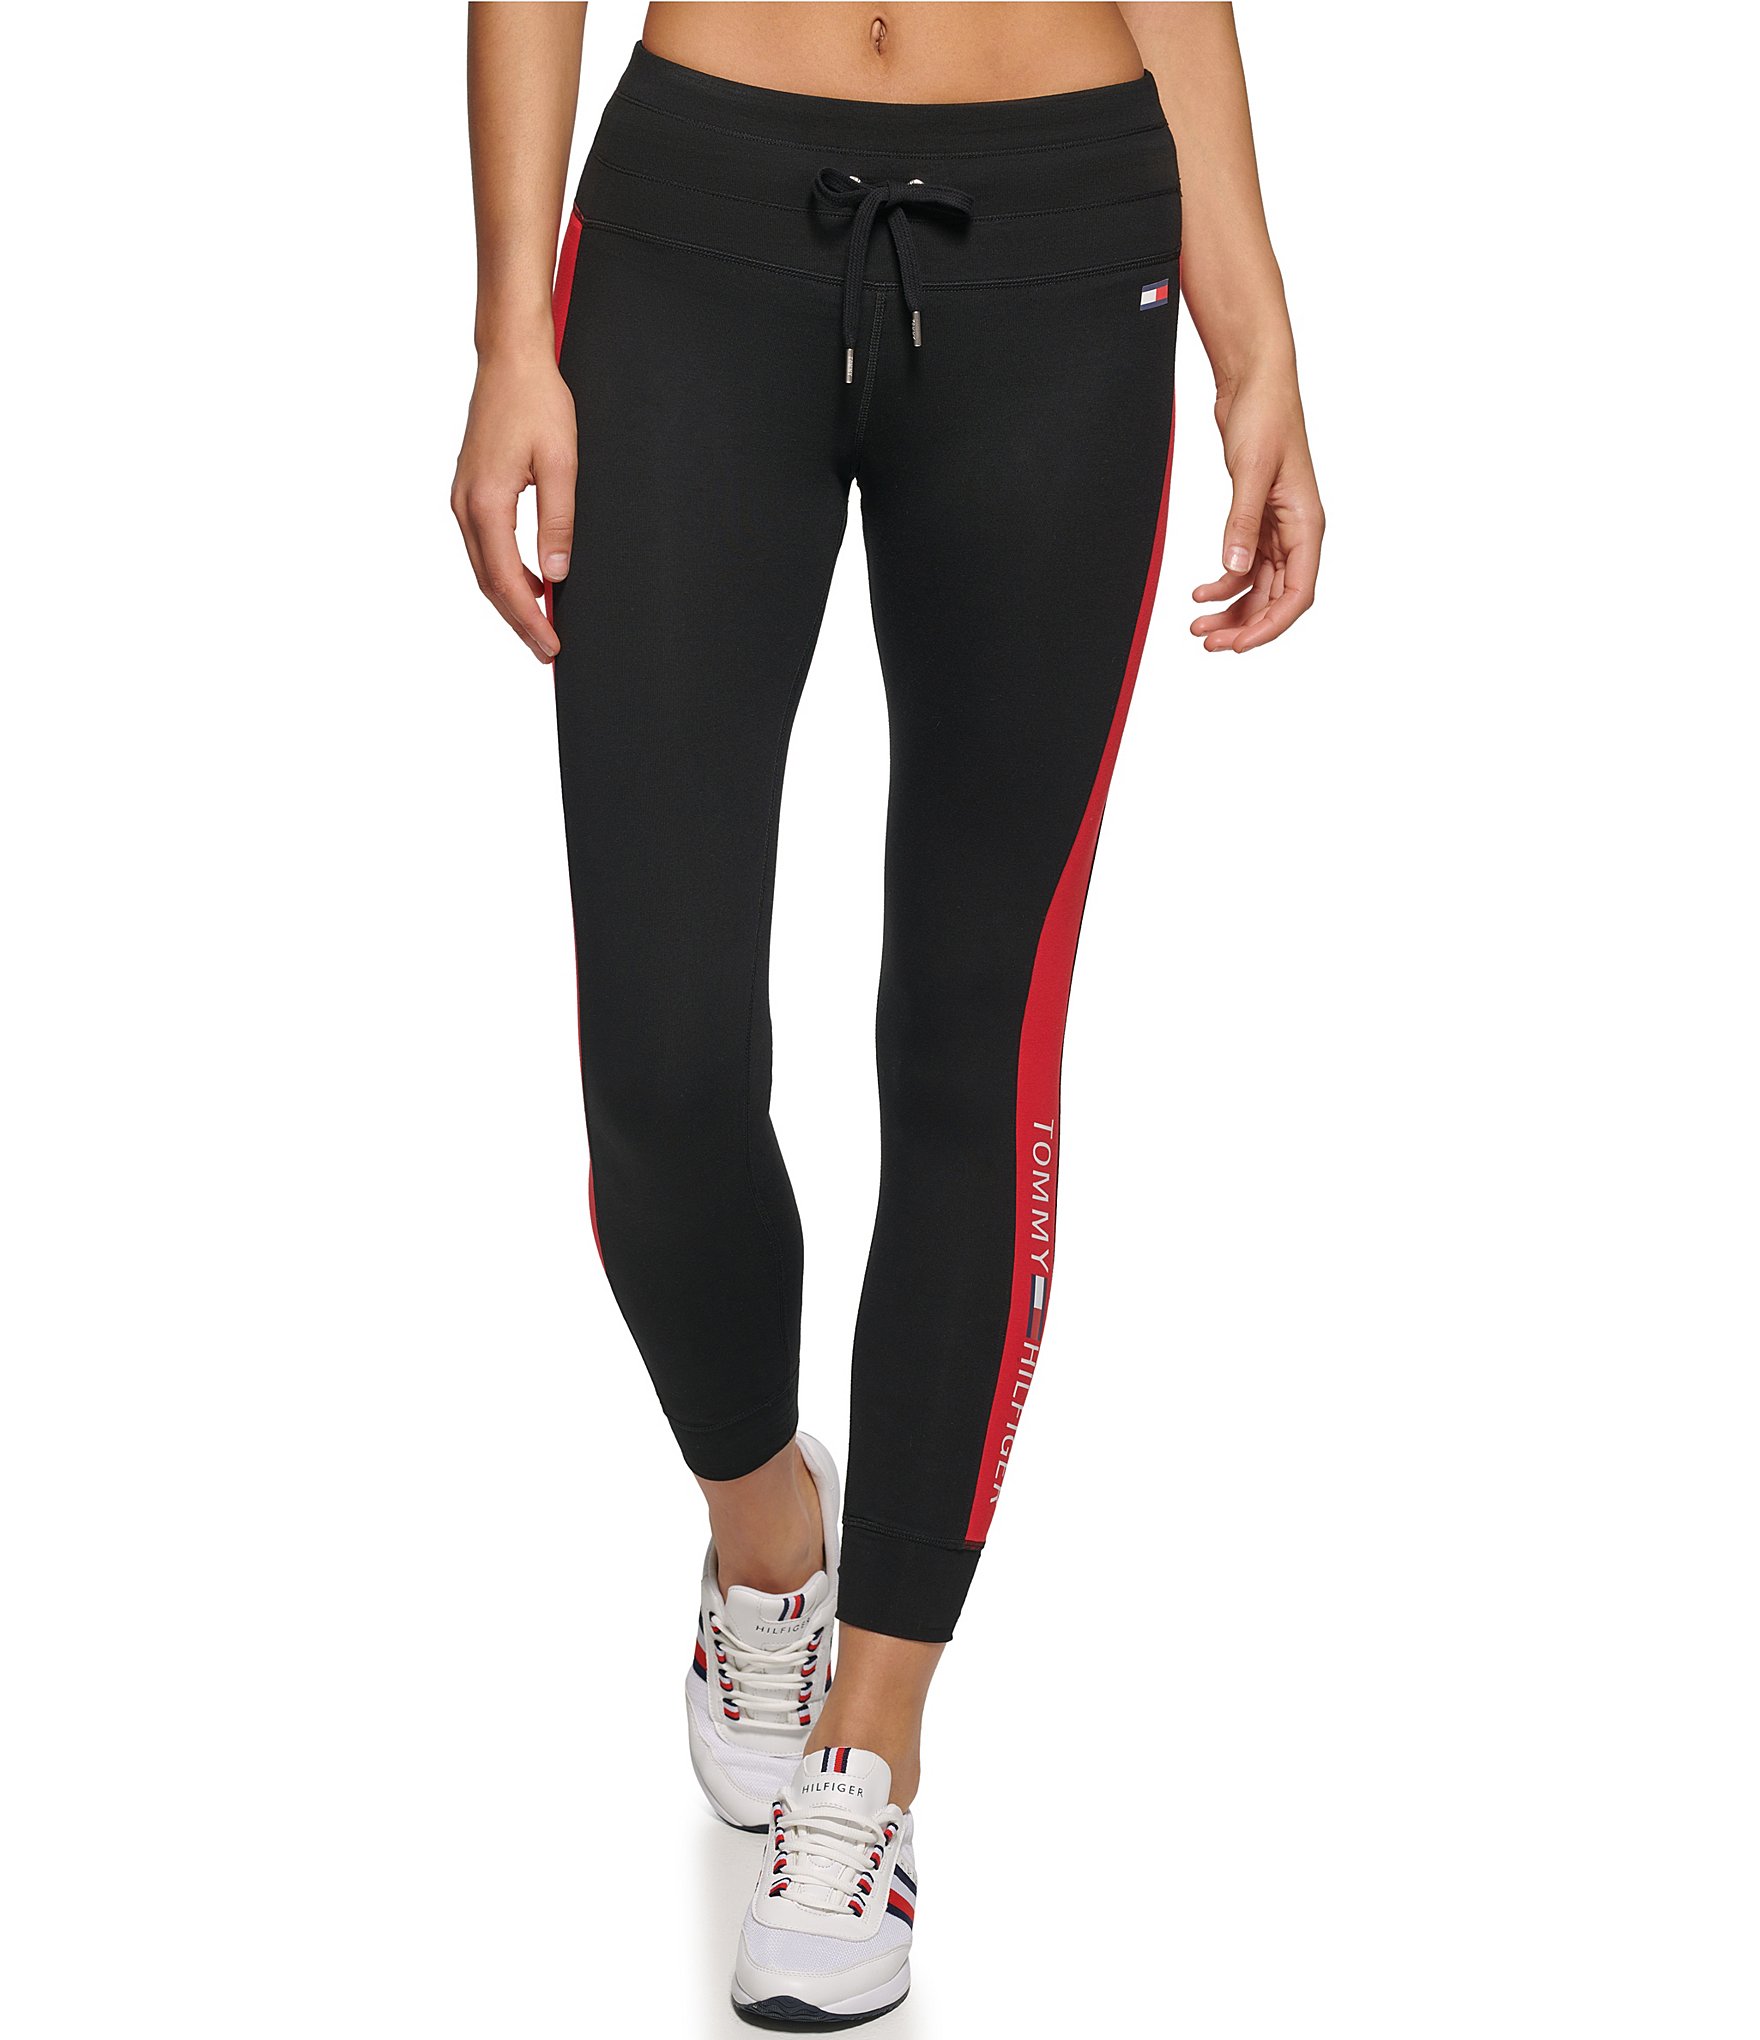 LEGGINGS WITH POCKET - TOMMY HILFIGER for WOMEN